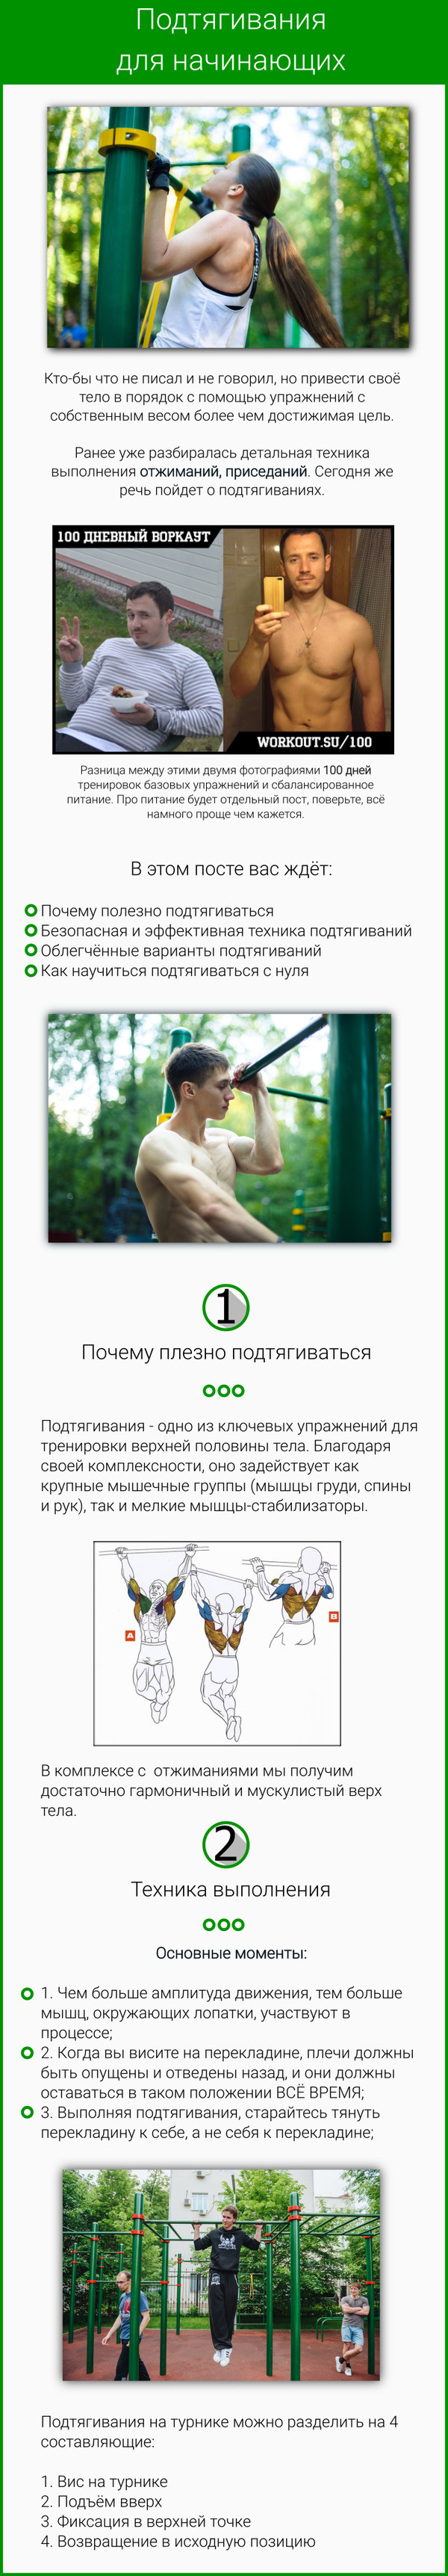 Pull-ups - Longpost, Pull-ups, Body, Physical Education, Workout, Health, GIF, Sport, My